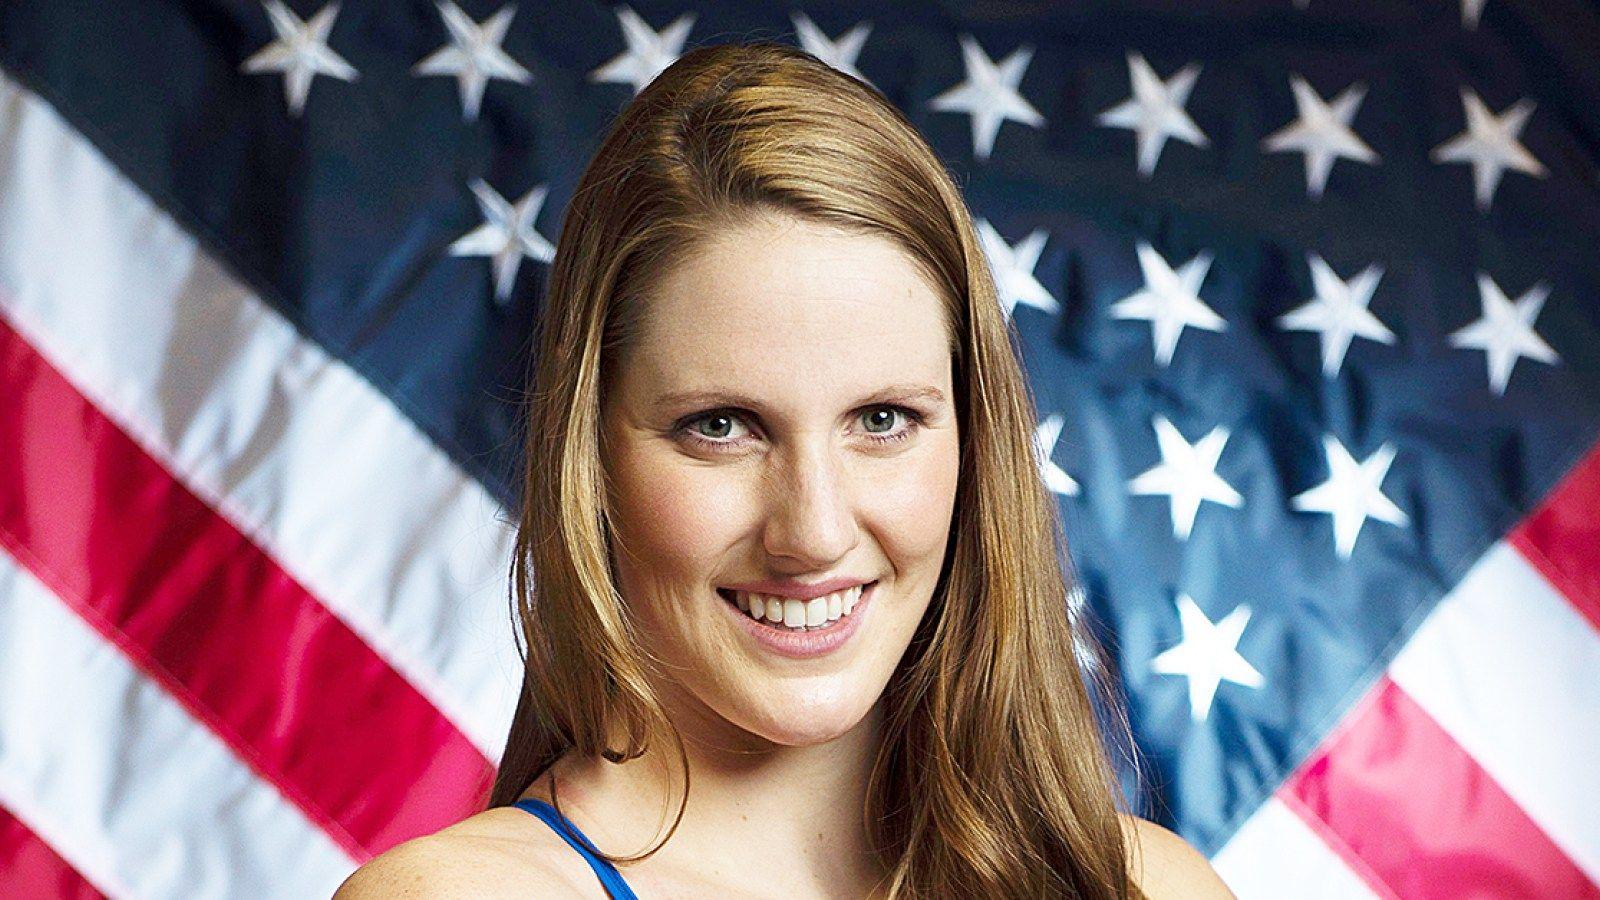 Olympic Swimmer Missy Franklin: What's In My Bag?